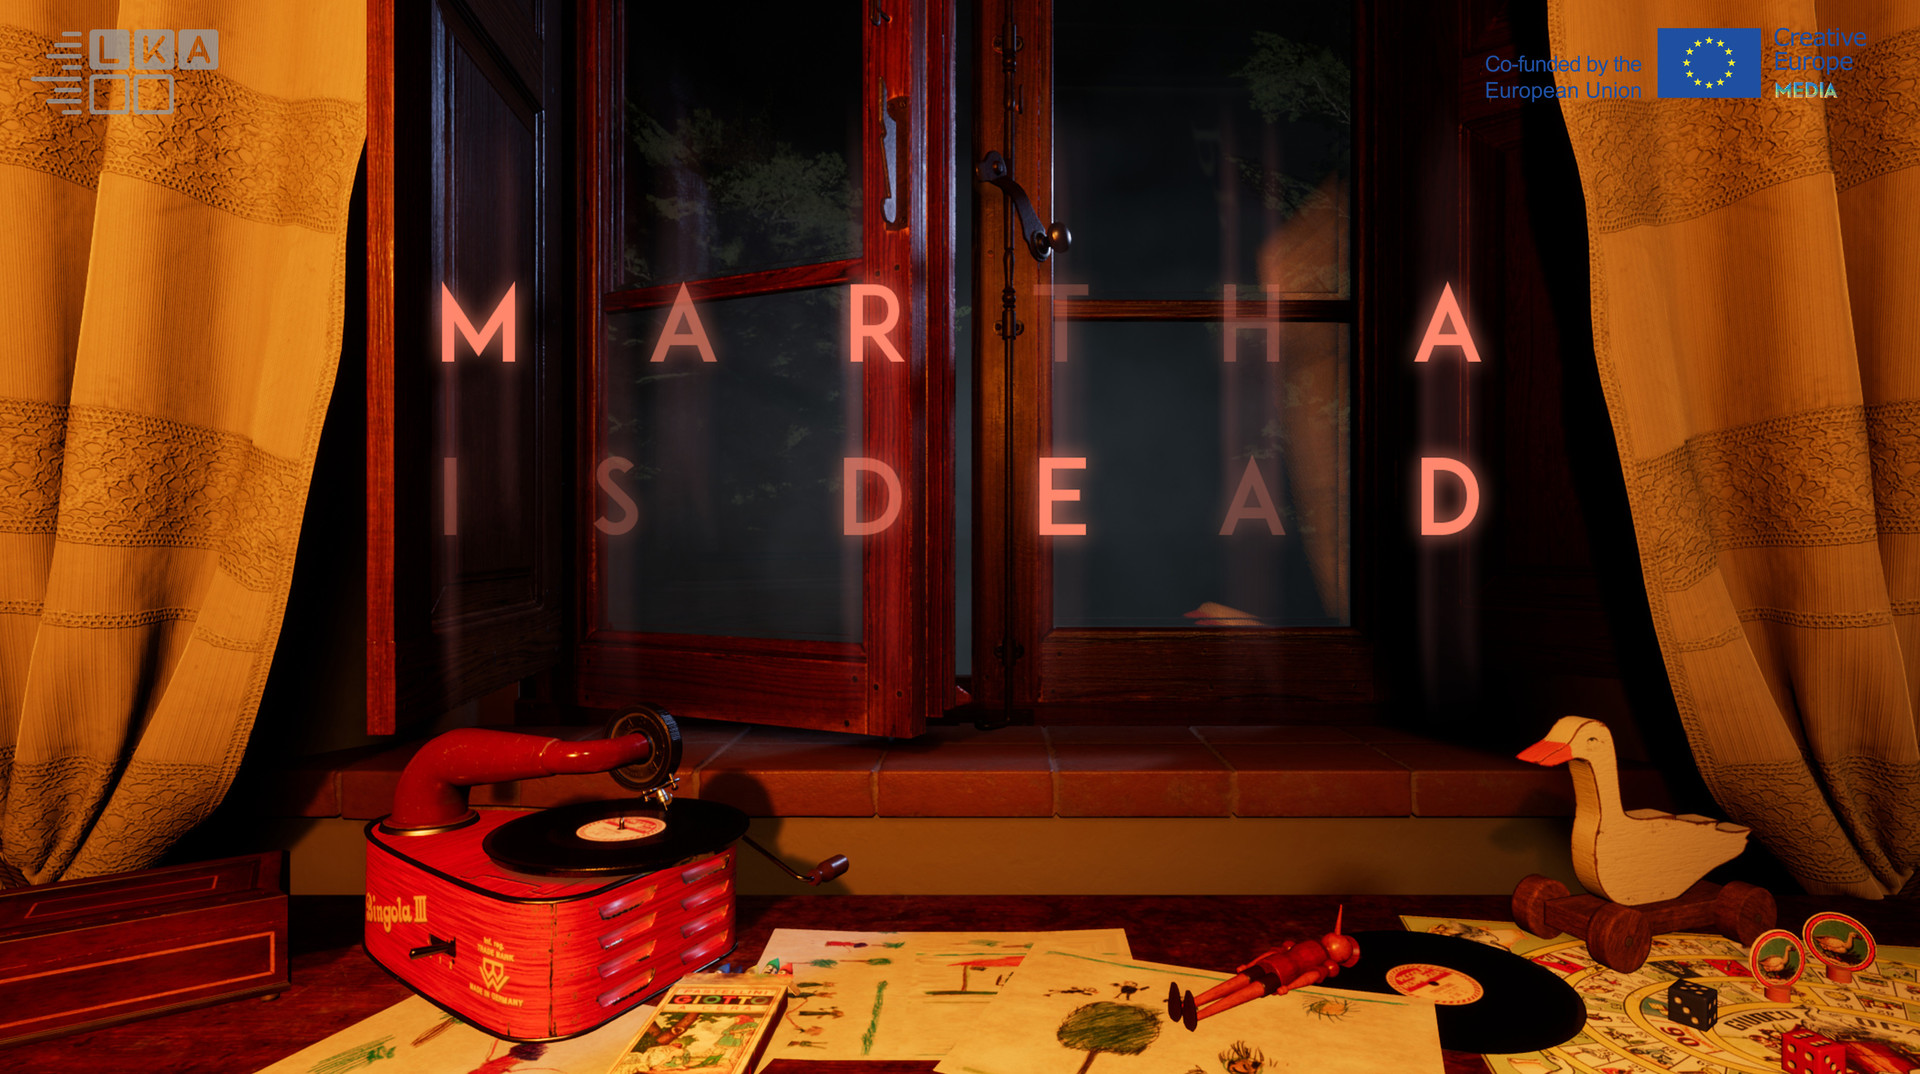 download free martha is dead review